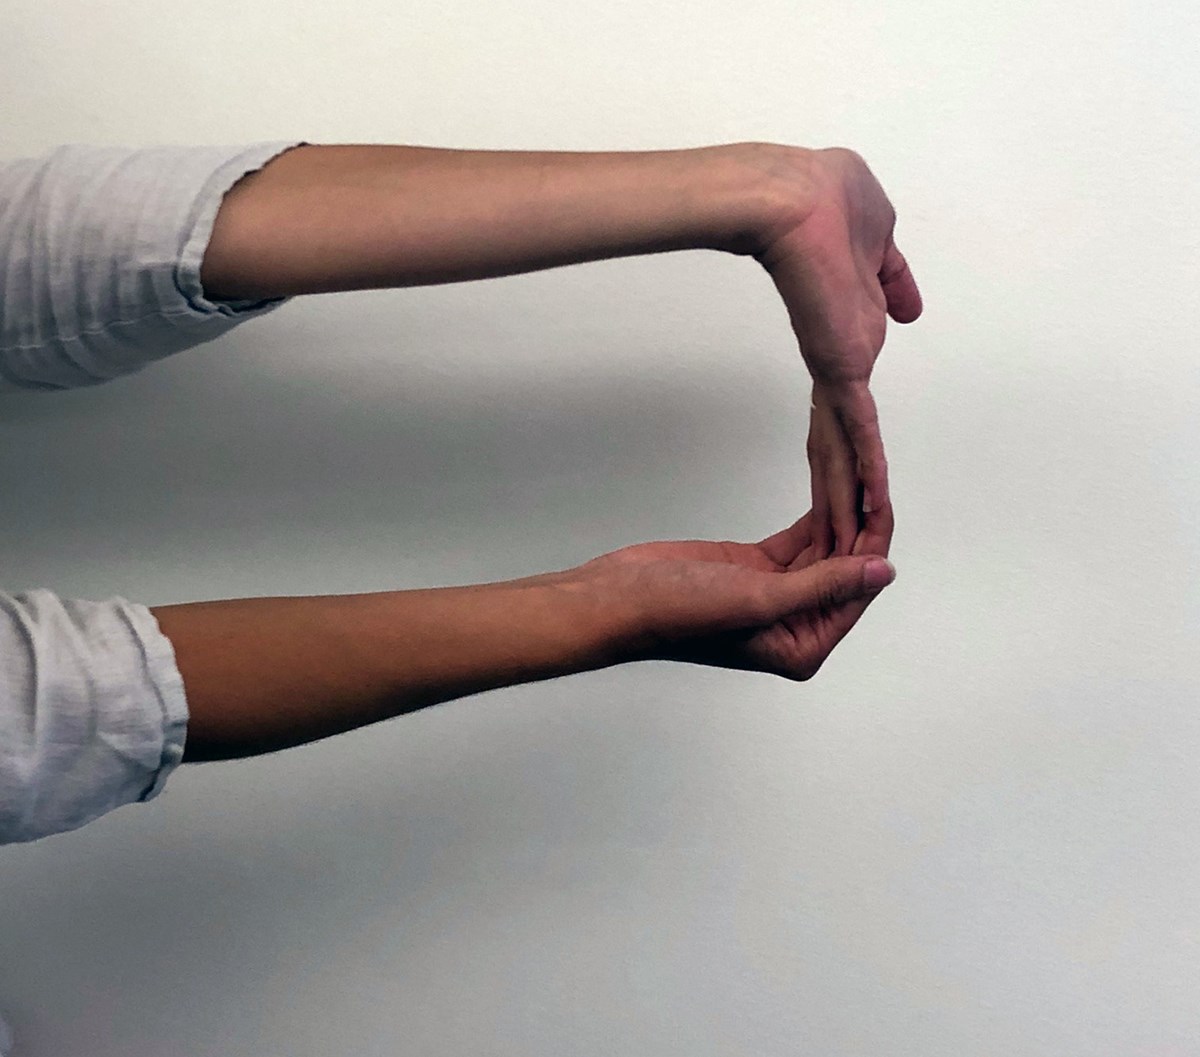 A person extends both arms in front of them. The top hand has the palm facing away from them and the fingers pointed towards the ground. The bottom hand is pulling the fingers of the top hand towards the body for a stretch.